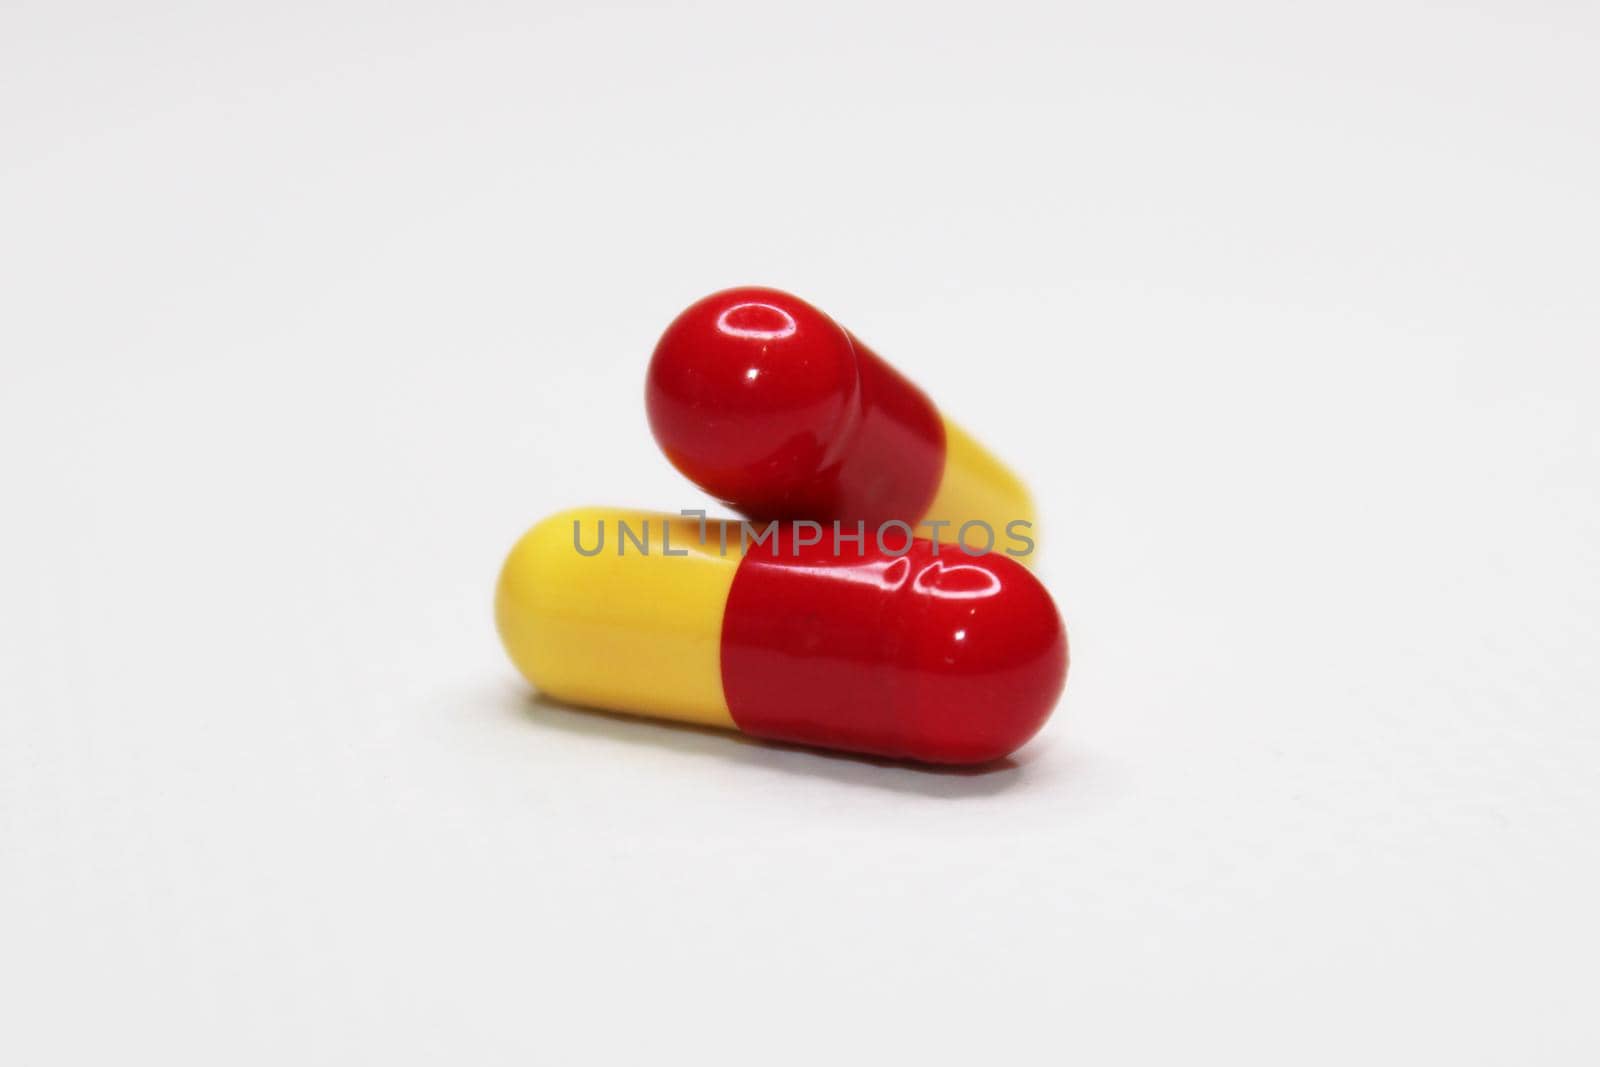 Two medicine capsules close-up on a light background. Health care concept.